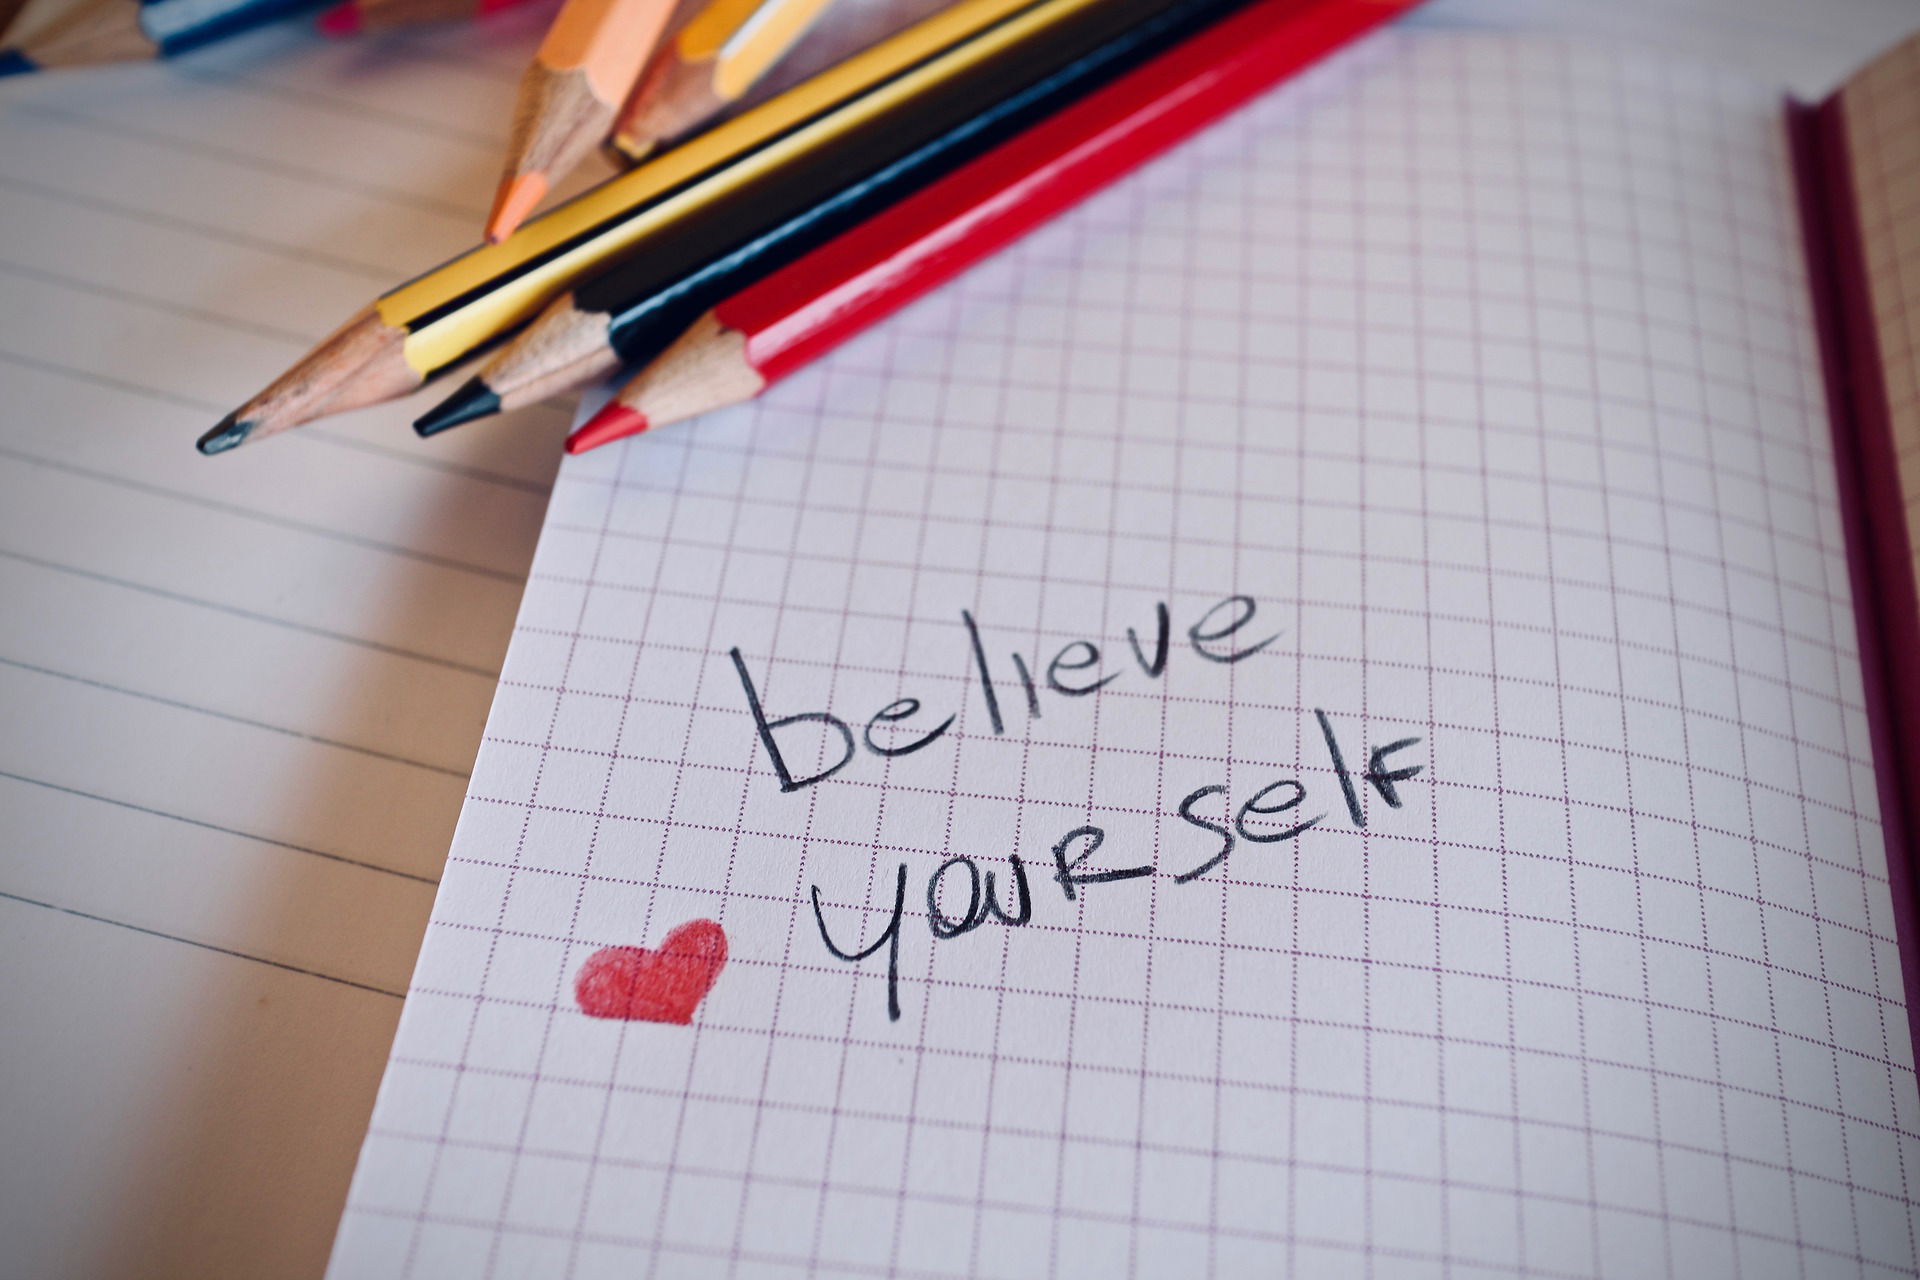 Why is self-esteem so important to mental health?